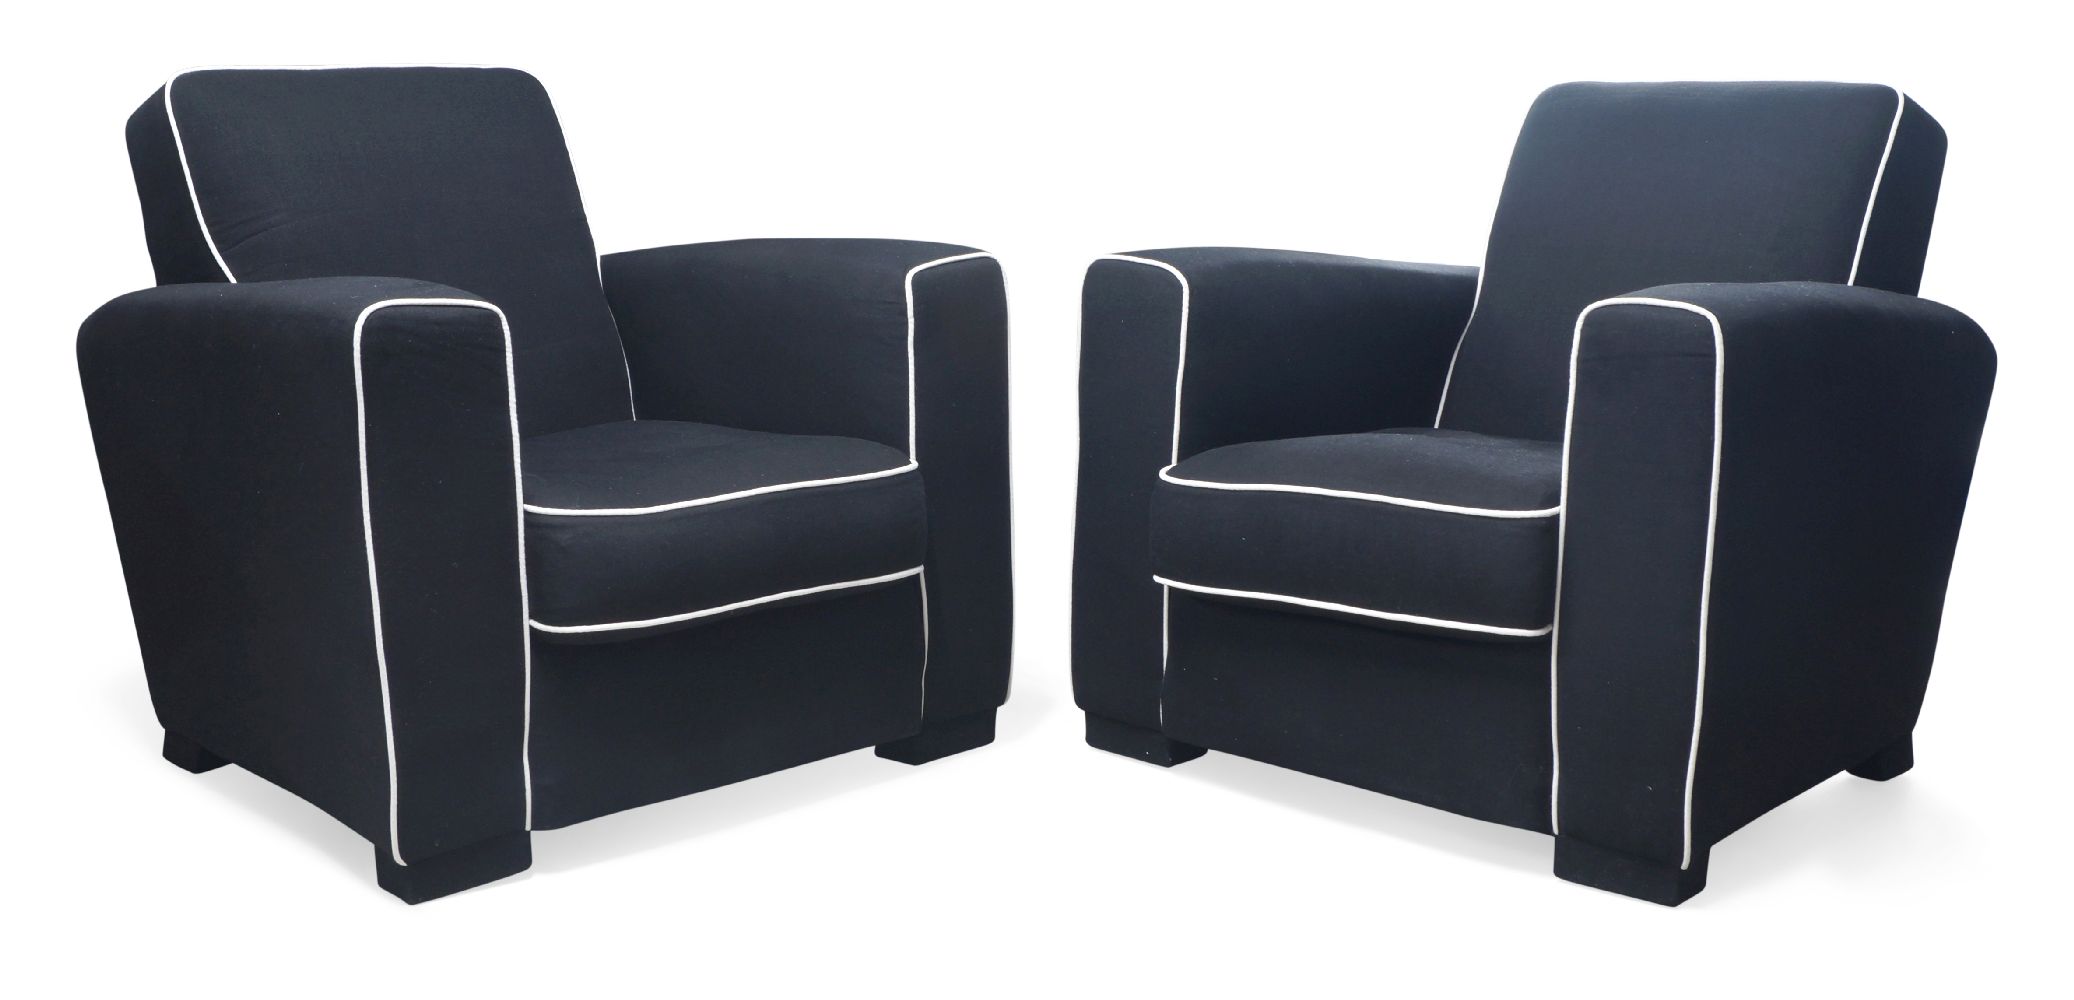 A pair of Art Deco club armchairs, possibly by Jacques Adnet, c.1940/50, Upholstered in black fabric